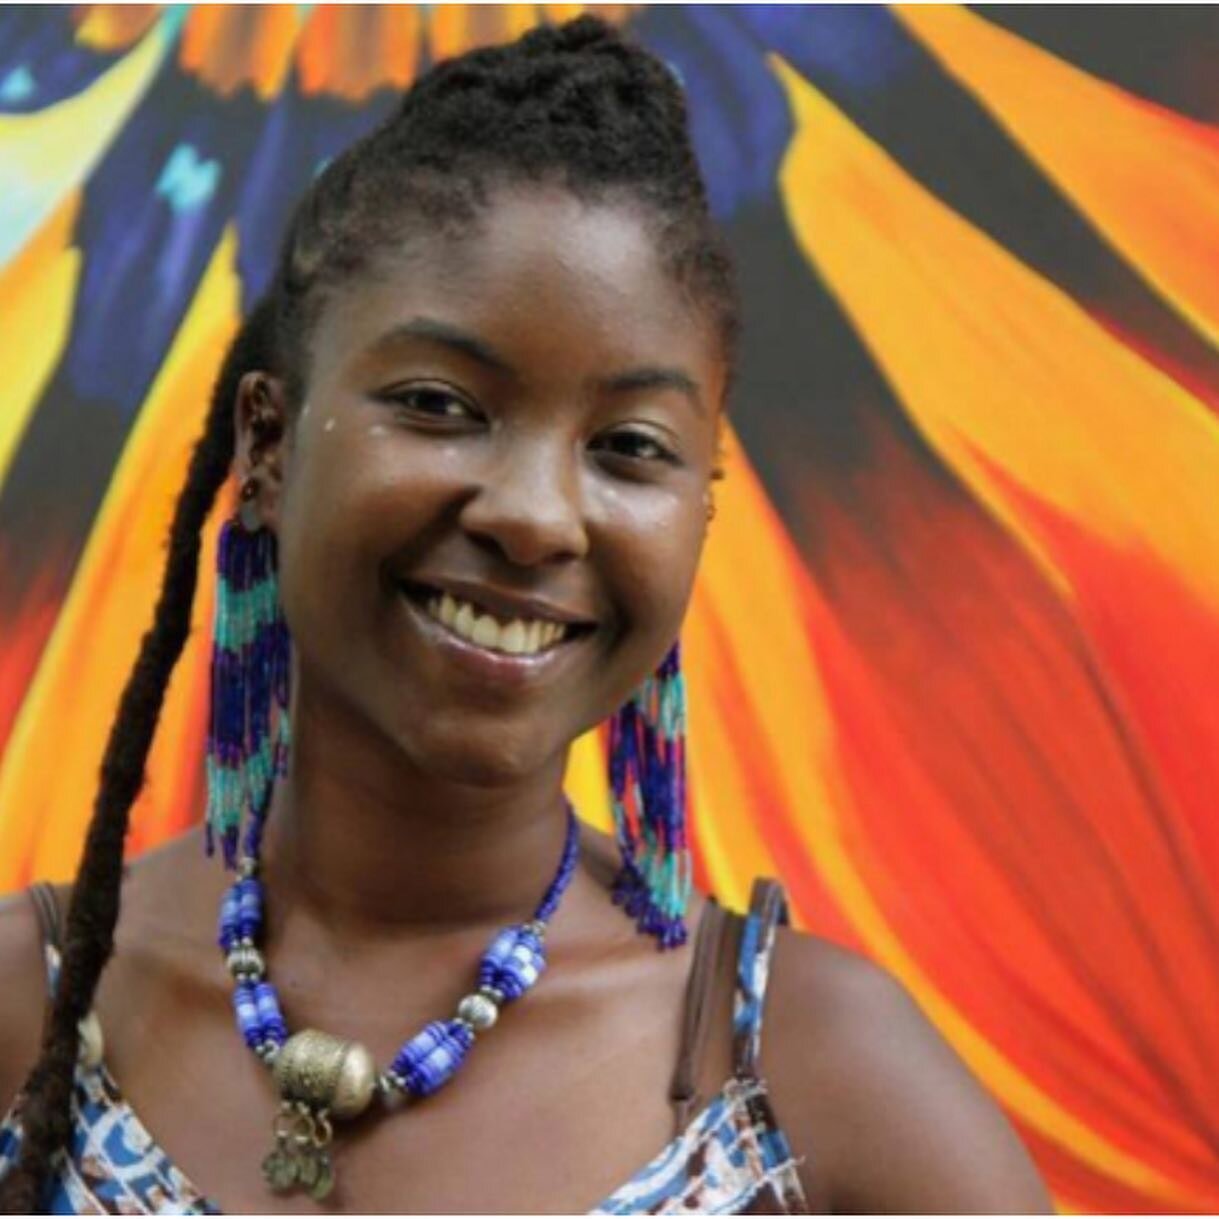 Yoga Effect is continuing to leverage yoga for social impact. In April 2021, Yoga Effect will fund  intro to yoga classes at TeacHaiti in Port-au-Prince Haiti. Meet Ama Makeda-yoga instructor and Rosedanie Cadet of Helping Hands Noramise. They are th